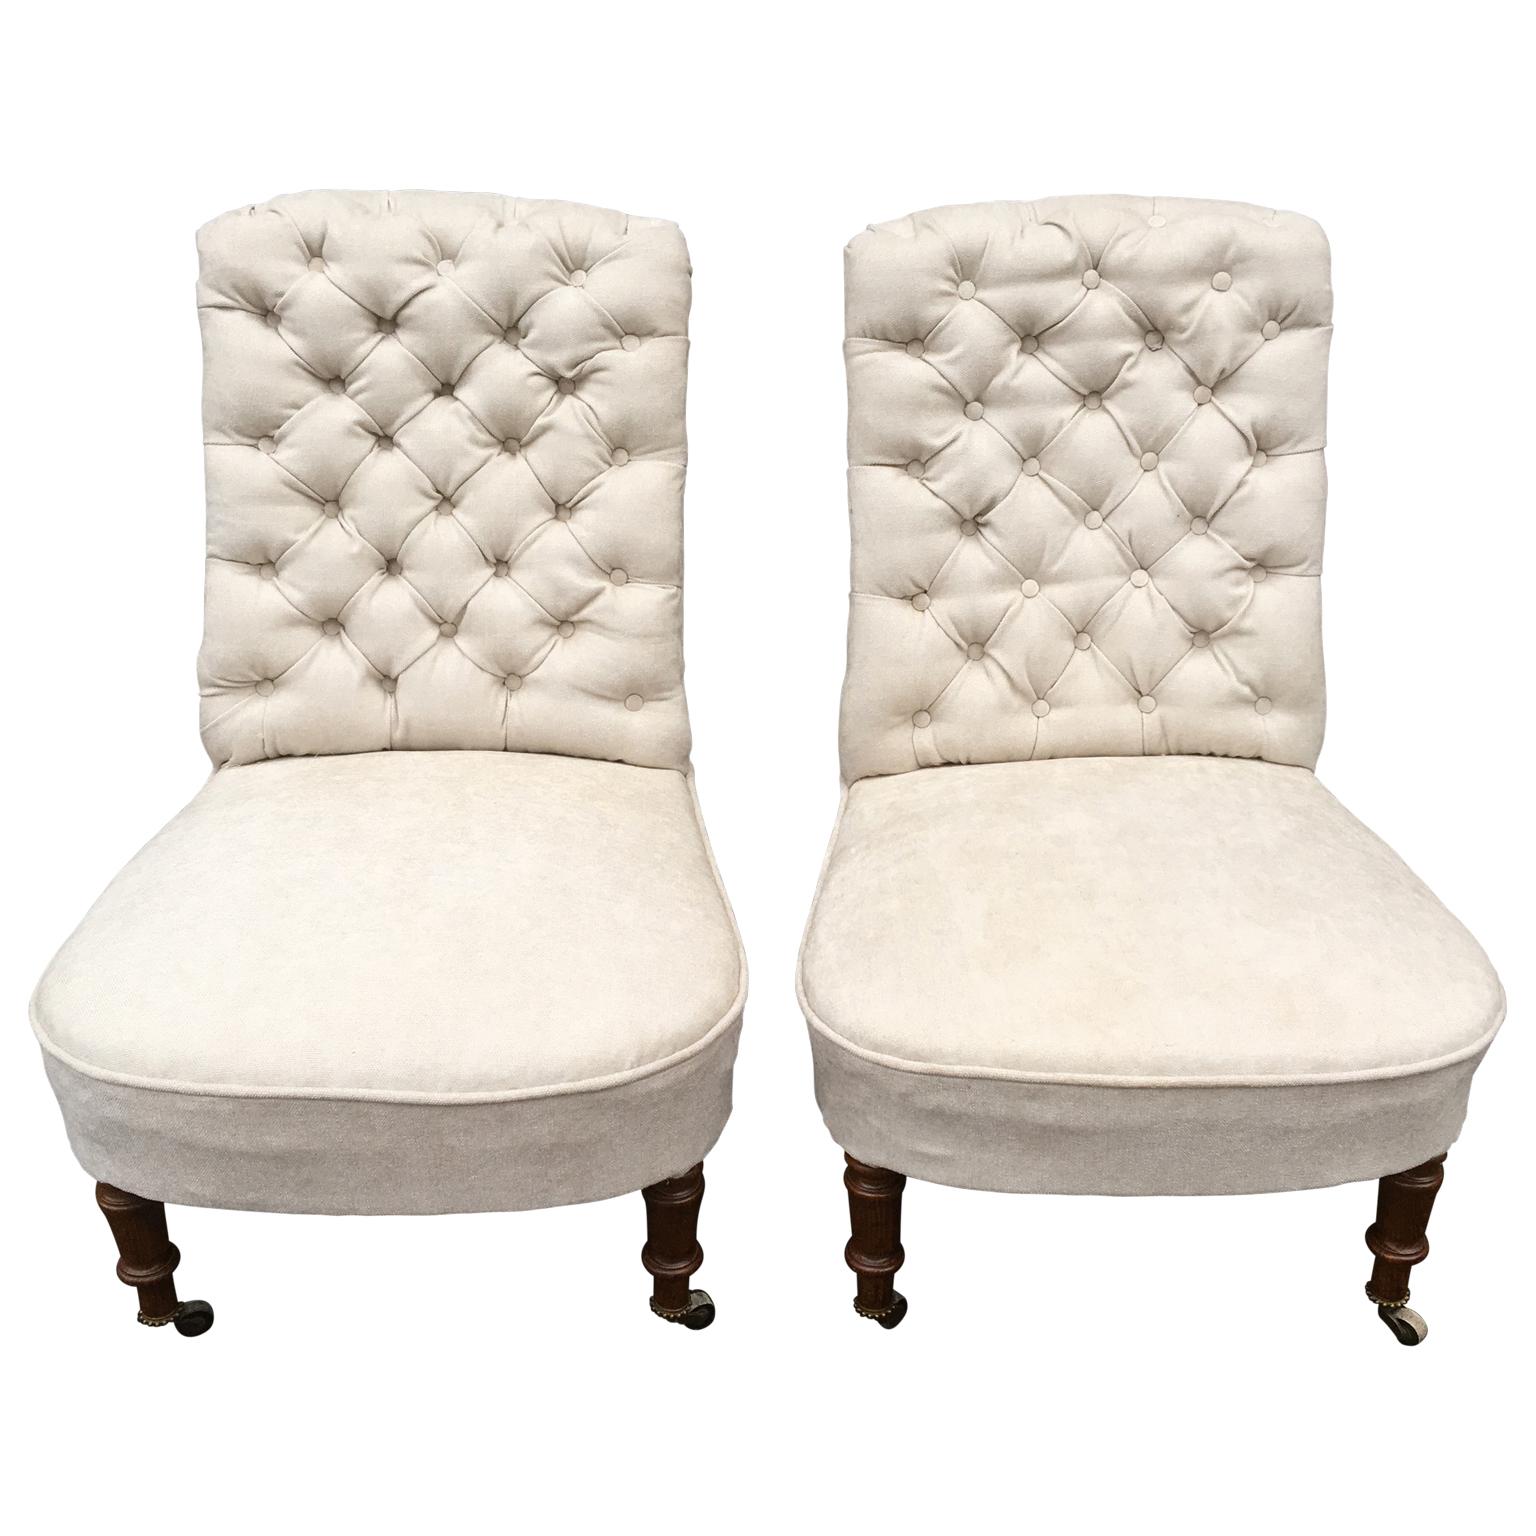 High Victorian Pair Of Upholstered Swedish Oskarian Slipper Chairs, From The Victorian Period